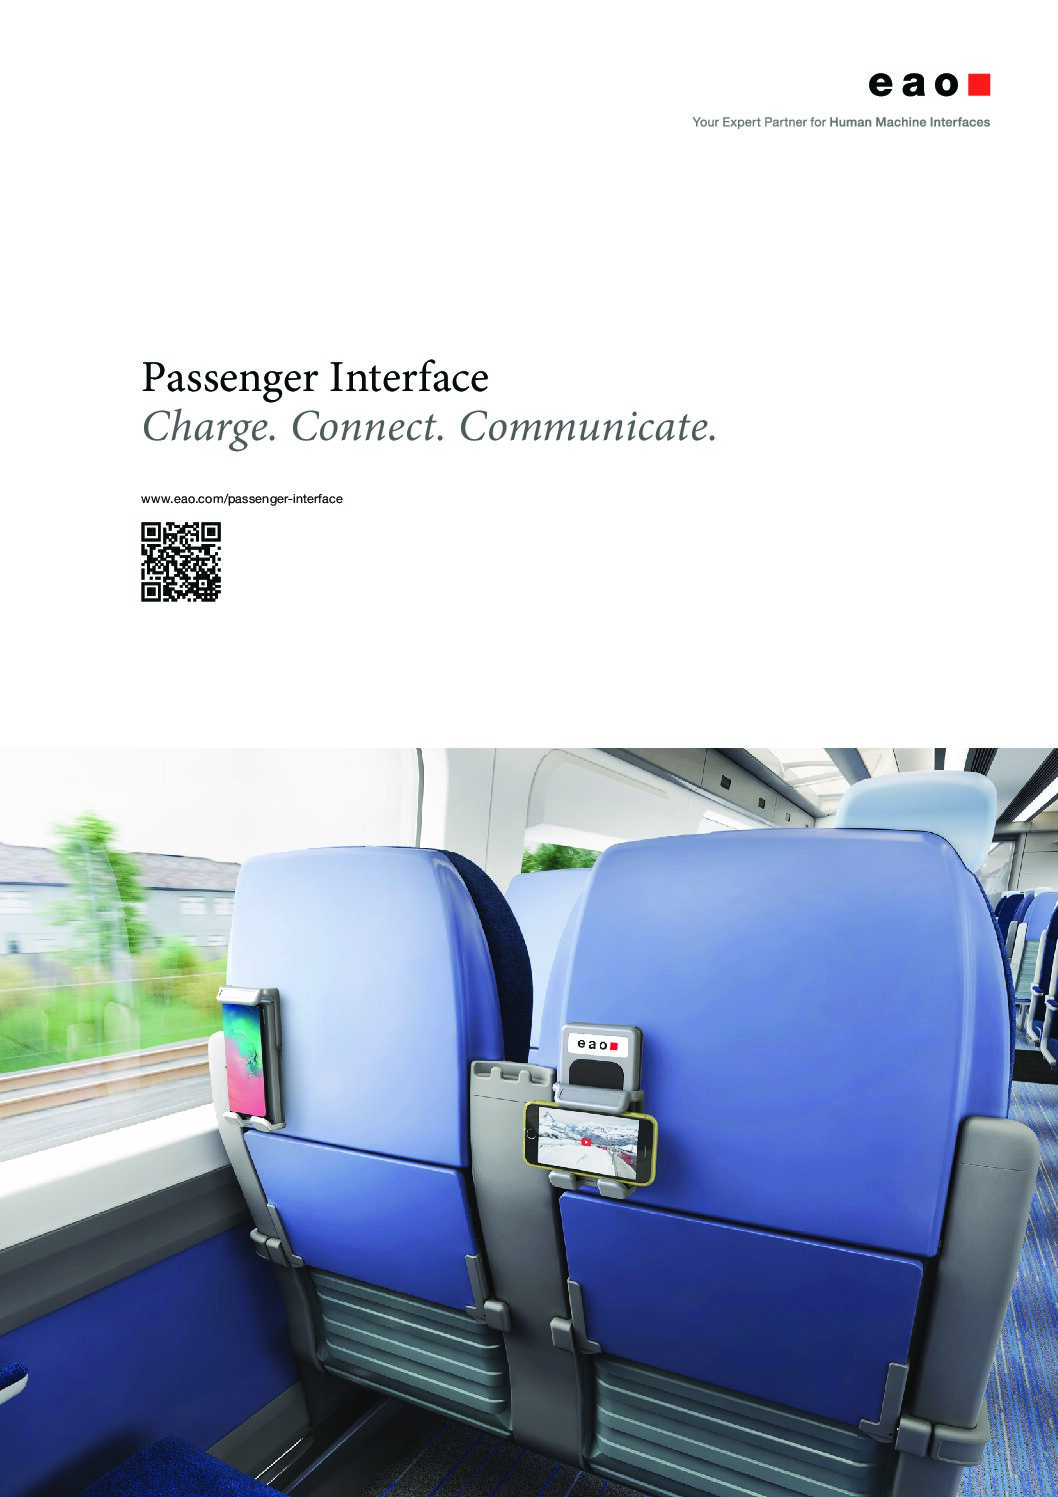 Passenger Interface – Charge, Connect, Communicate